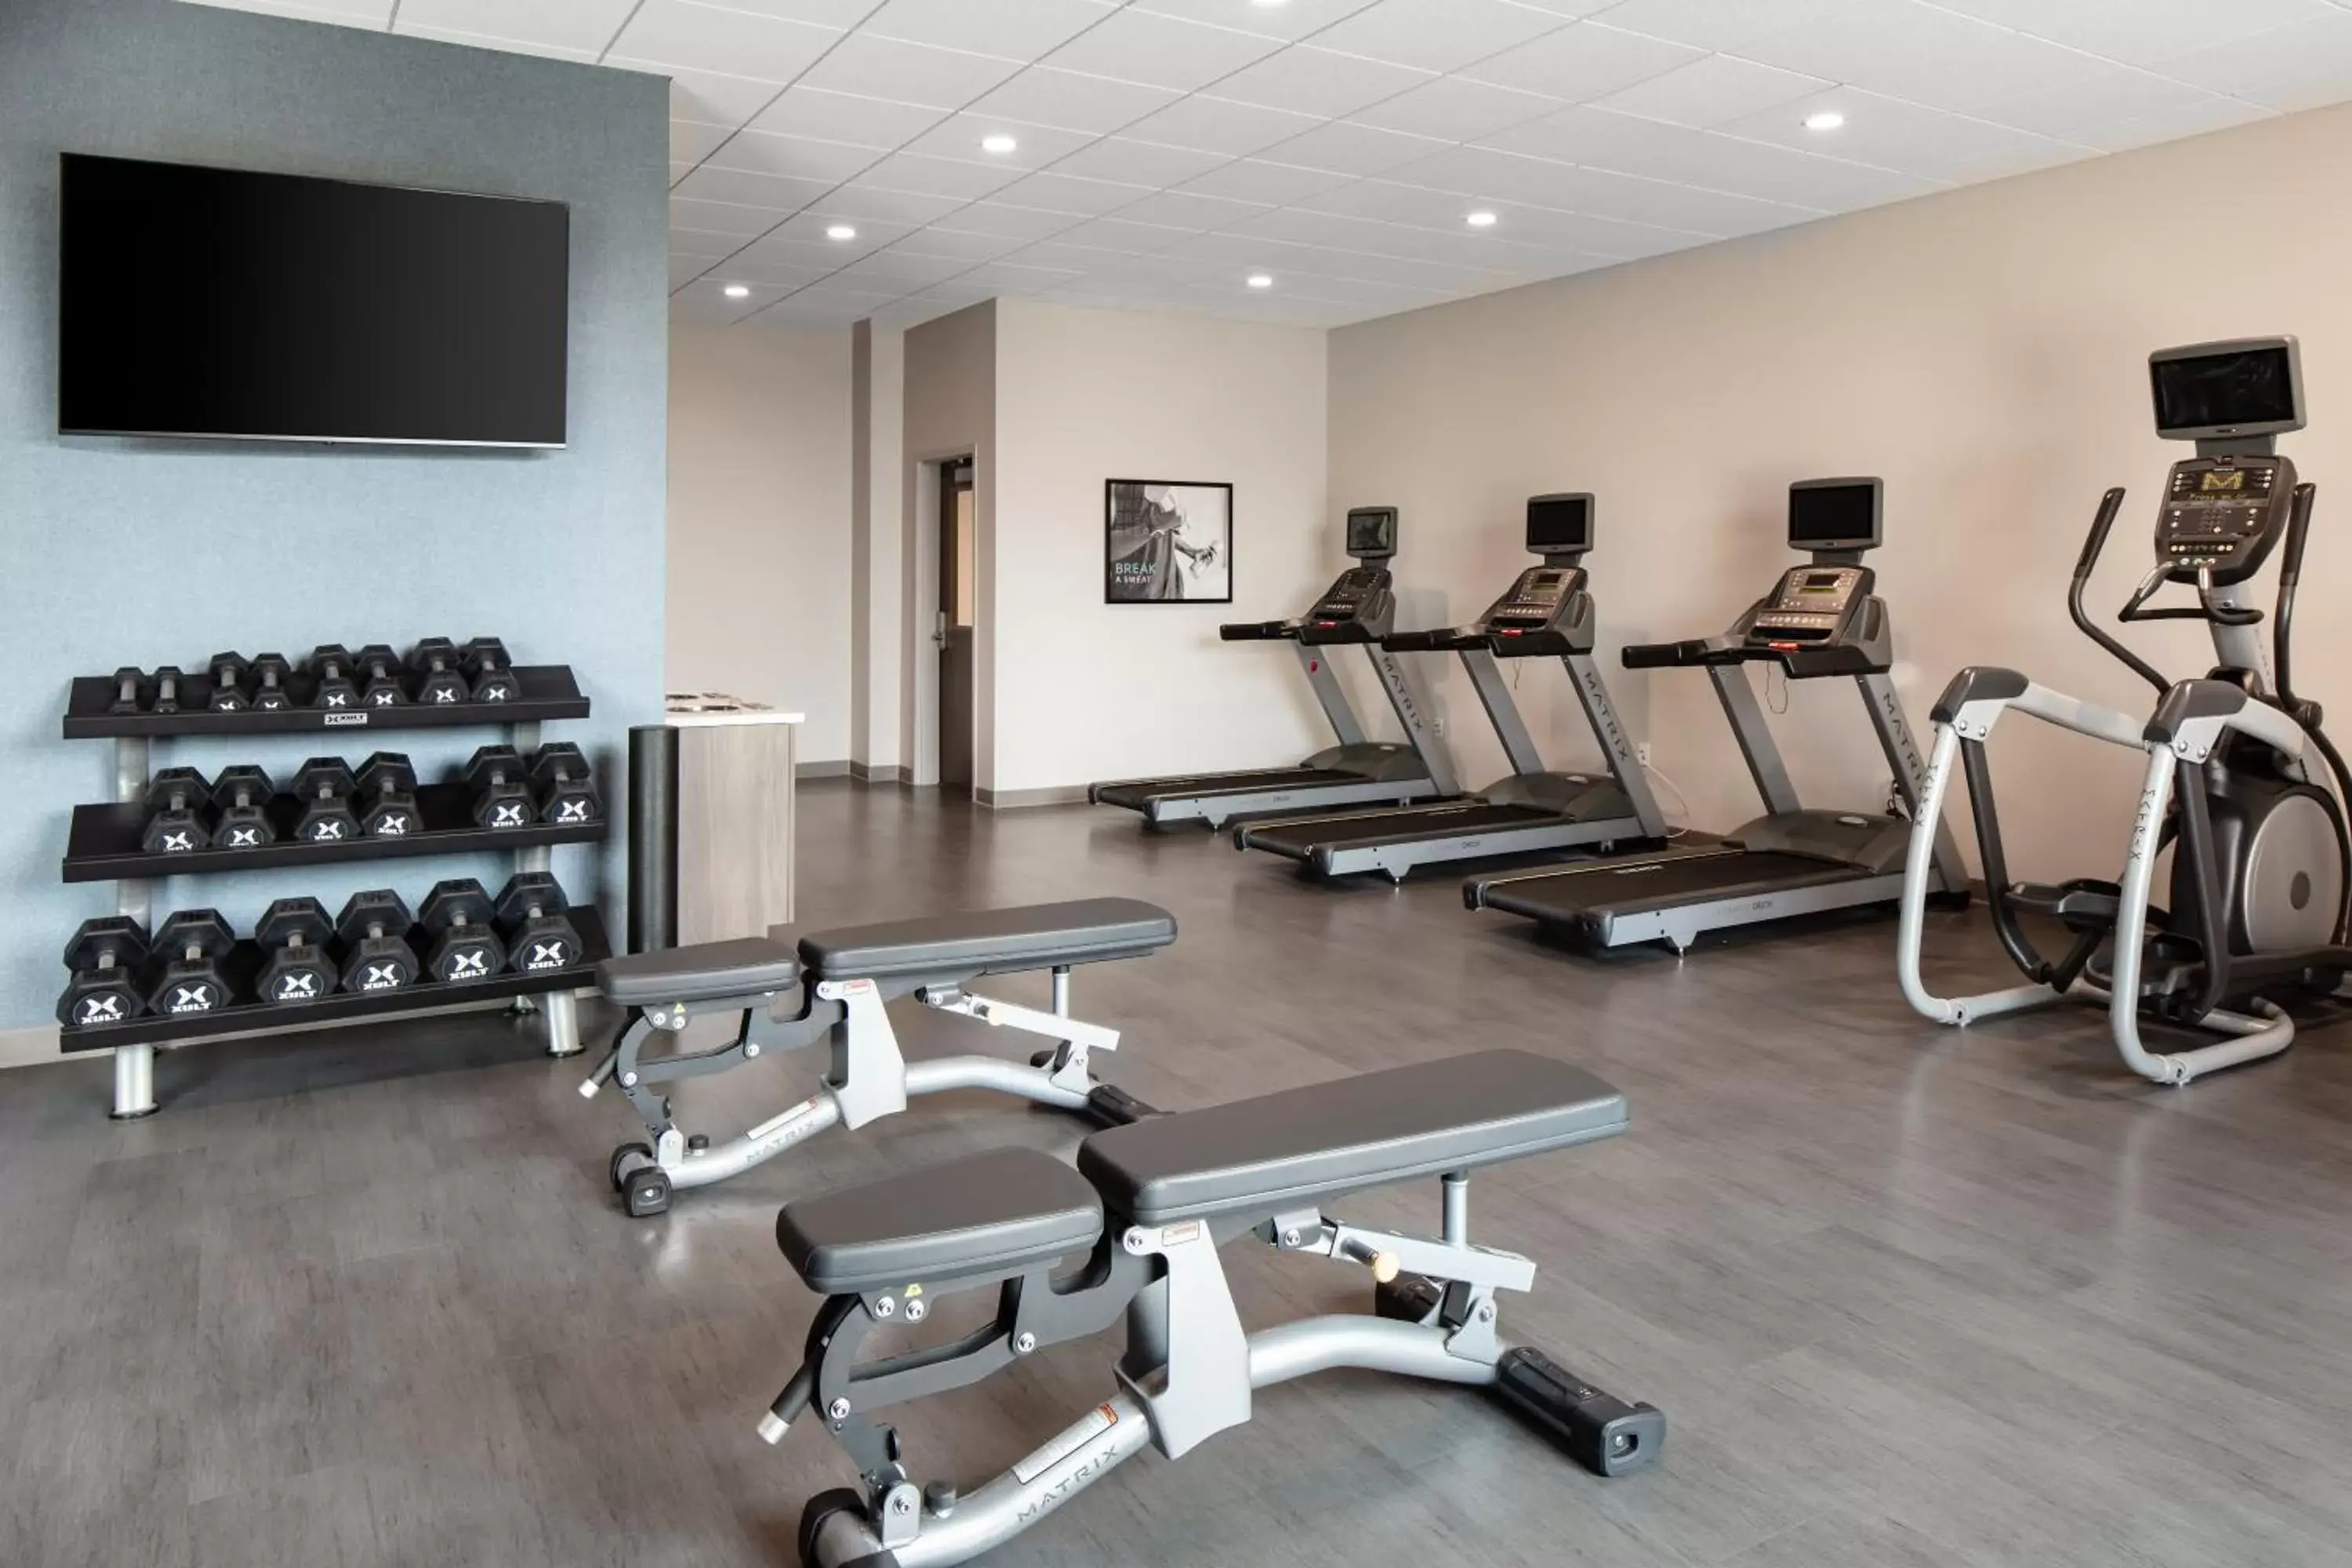 Fitness centre/facilities, Fitness Center/Facilities in Staybridge Suites - Iowa City - Coralville, an IHG Hotel